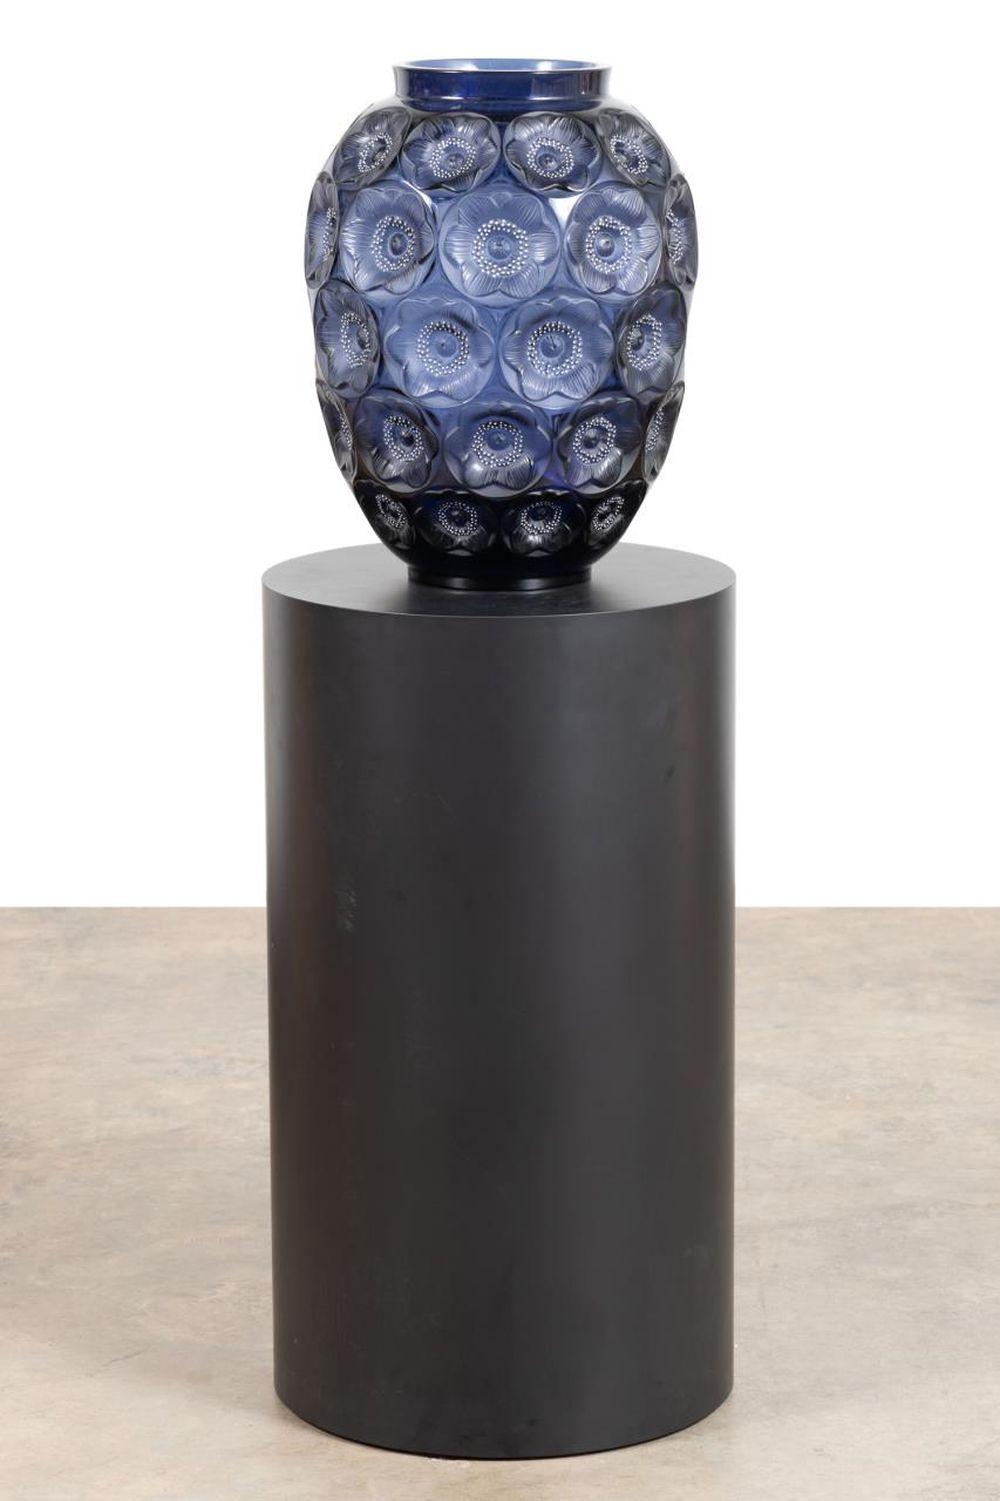 Limited edition Lalique ‘Anemones Grand’ ovoid form vase and pedestal, the vase 19 inches tall and executed in midnight blue crystal with white enamel accents ($24,200).